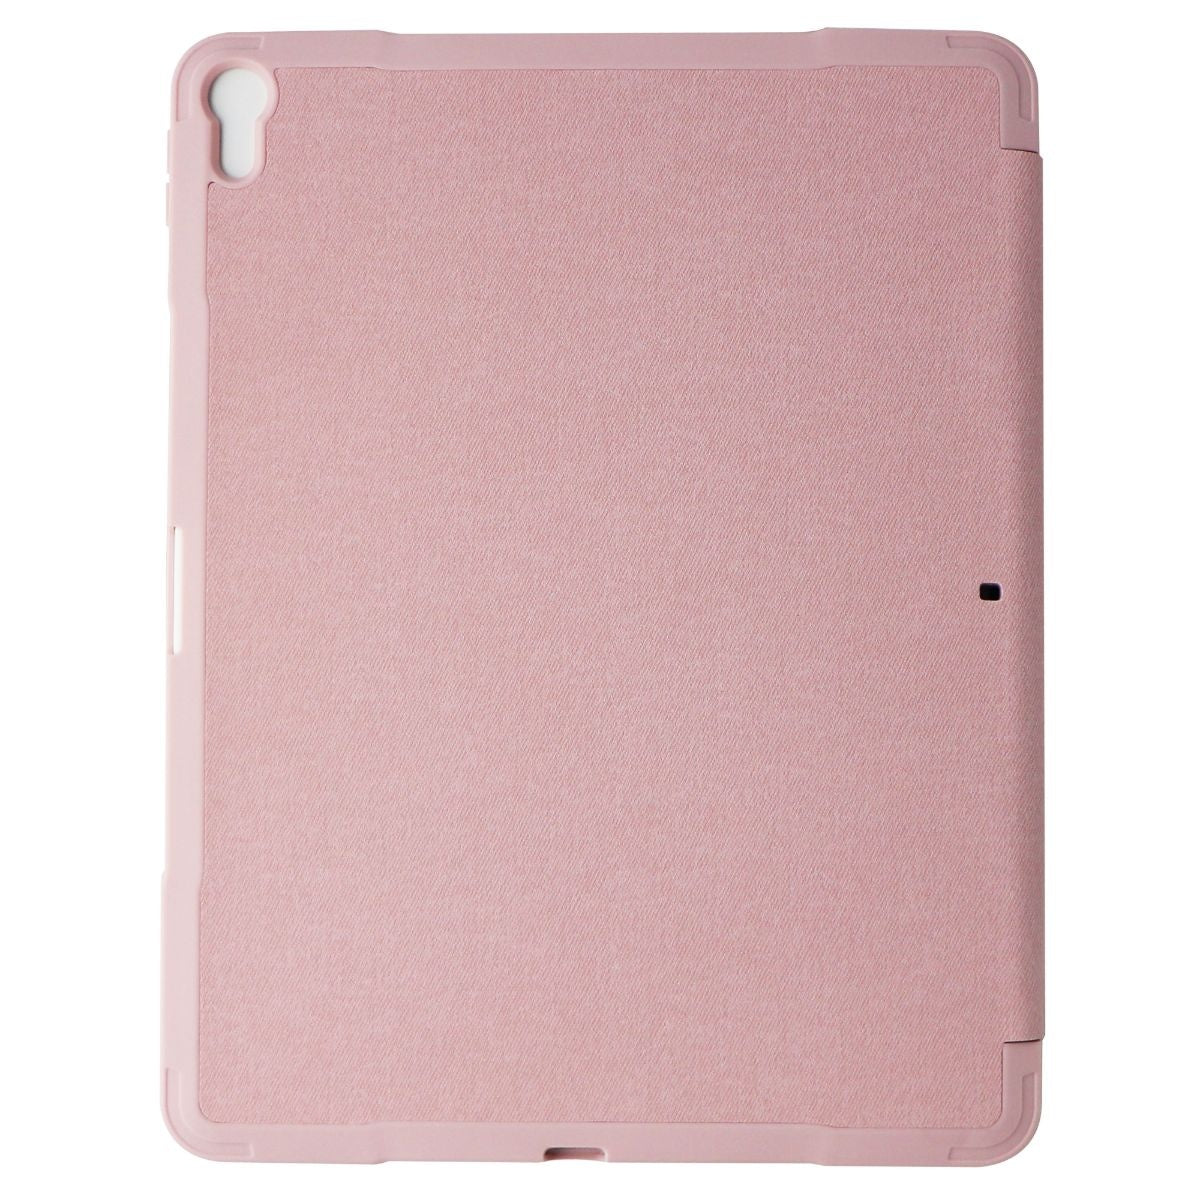 Verizon Soft Folio Case and Glass Screen for iPad Pro 11-inch (2018 Only) - Pink iPad/Tablet Accessories - Cases, Covers, Keyboard Folios Verizon    - Simple Cell Bulk Wholesale Pricing - USA Seller